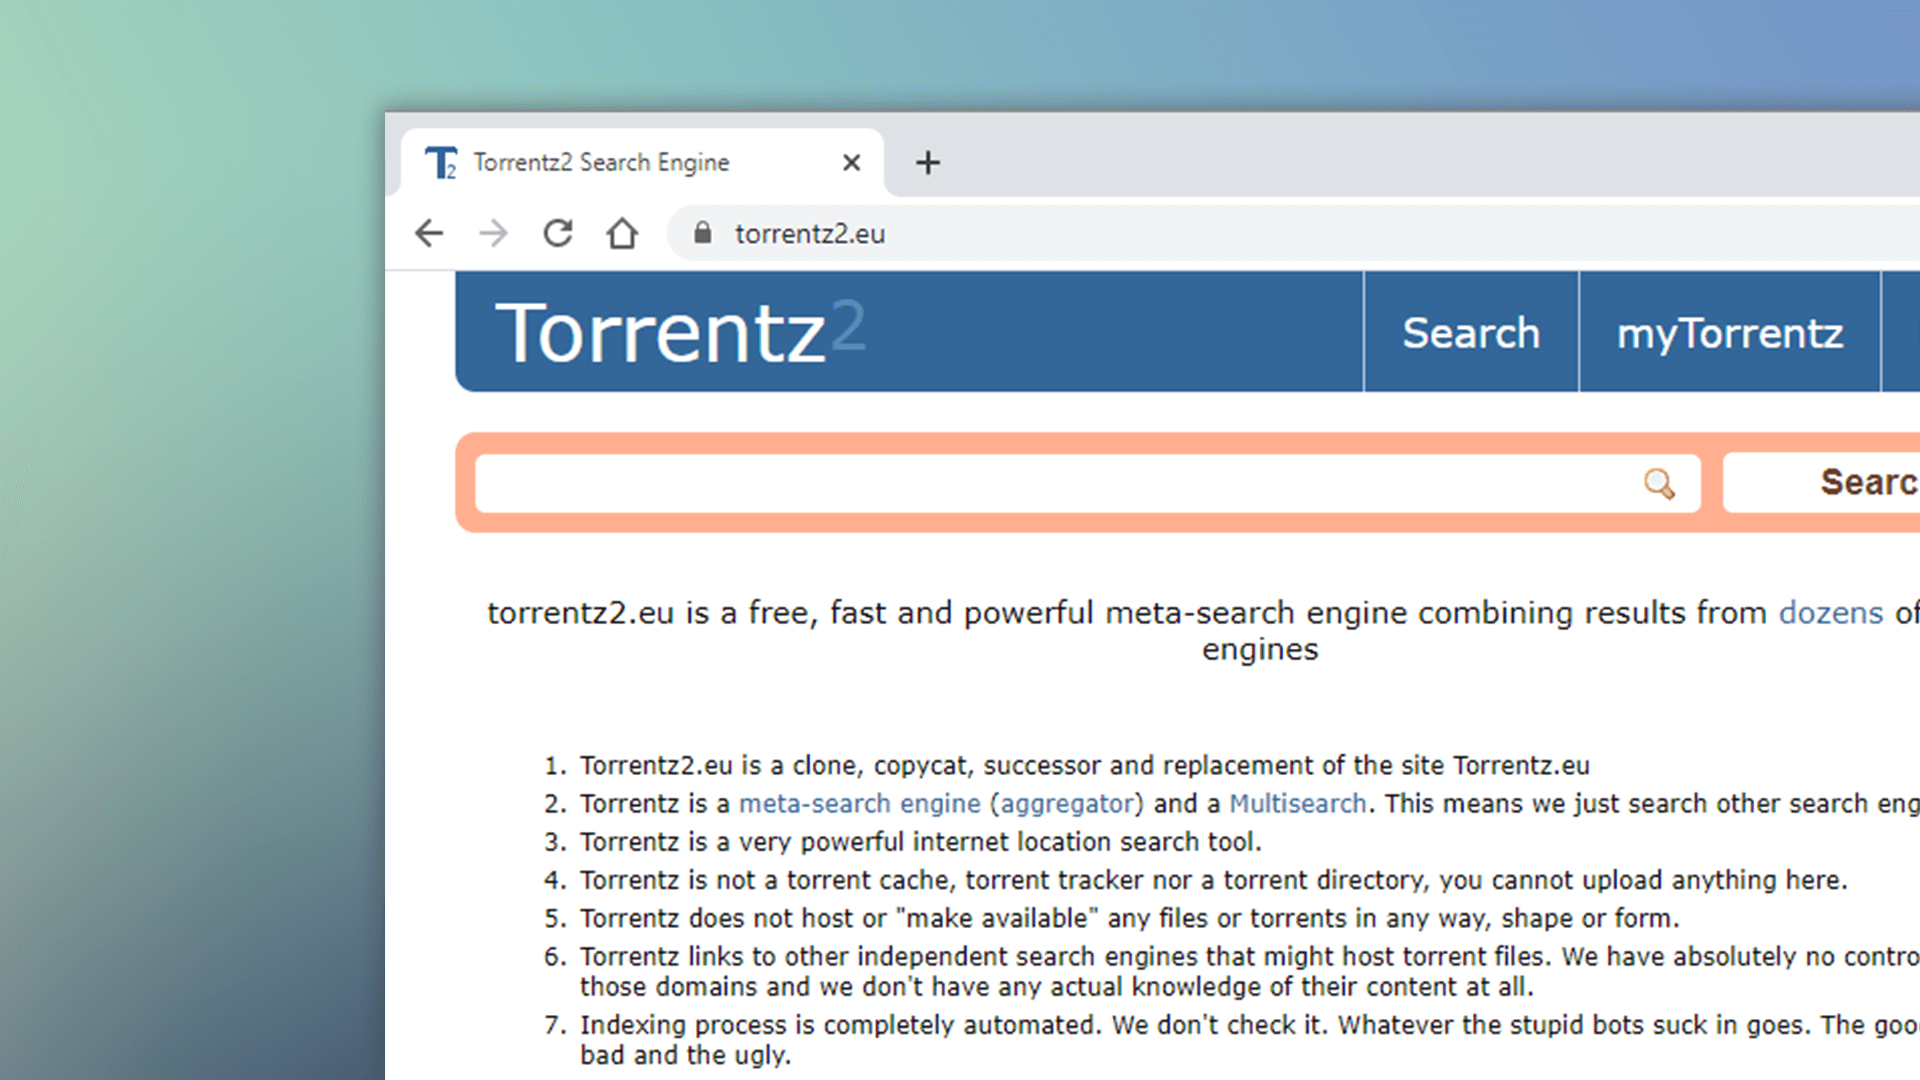 torrent search engines download